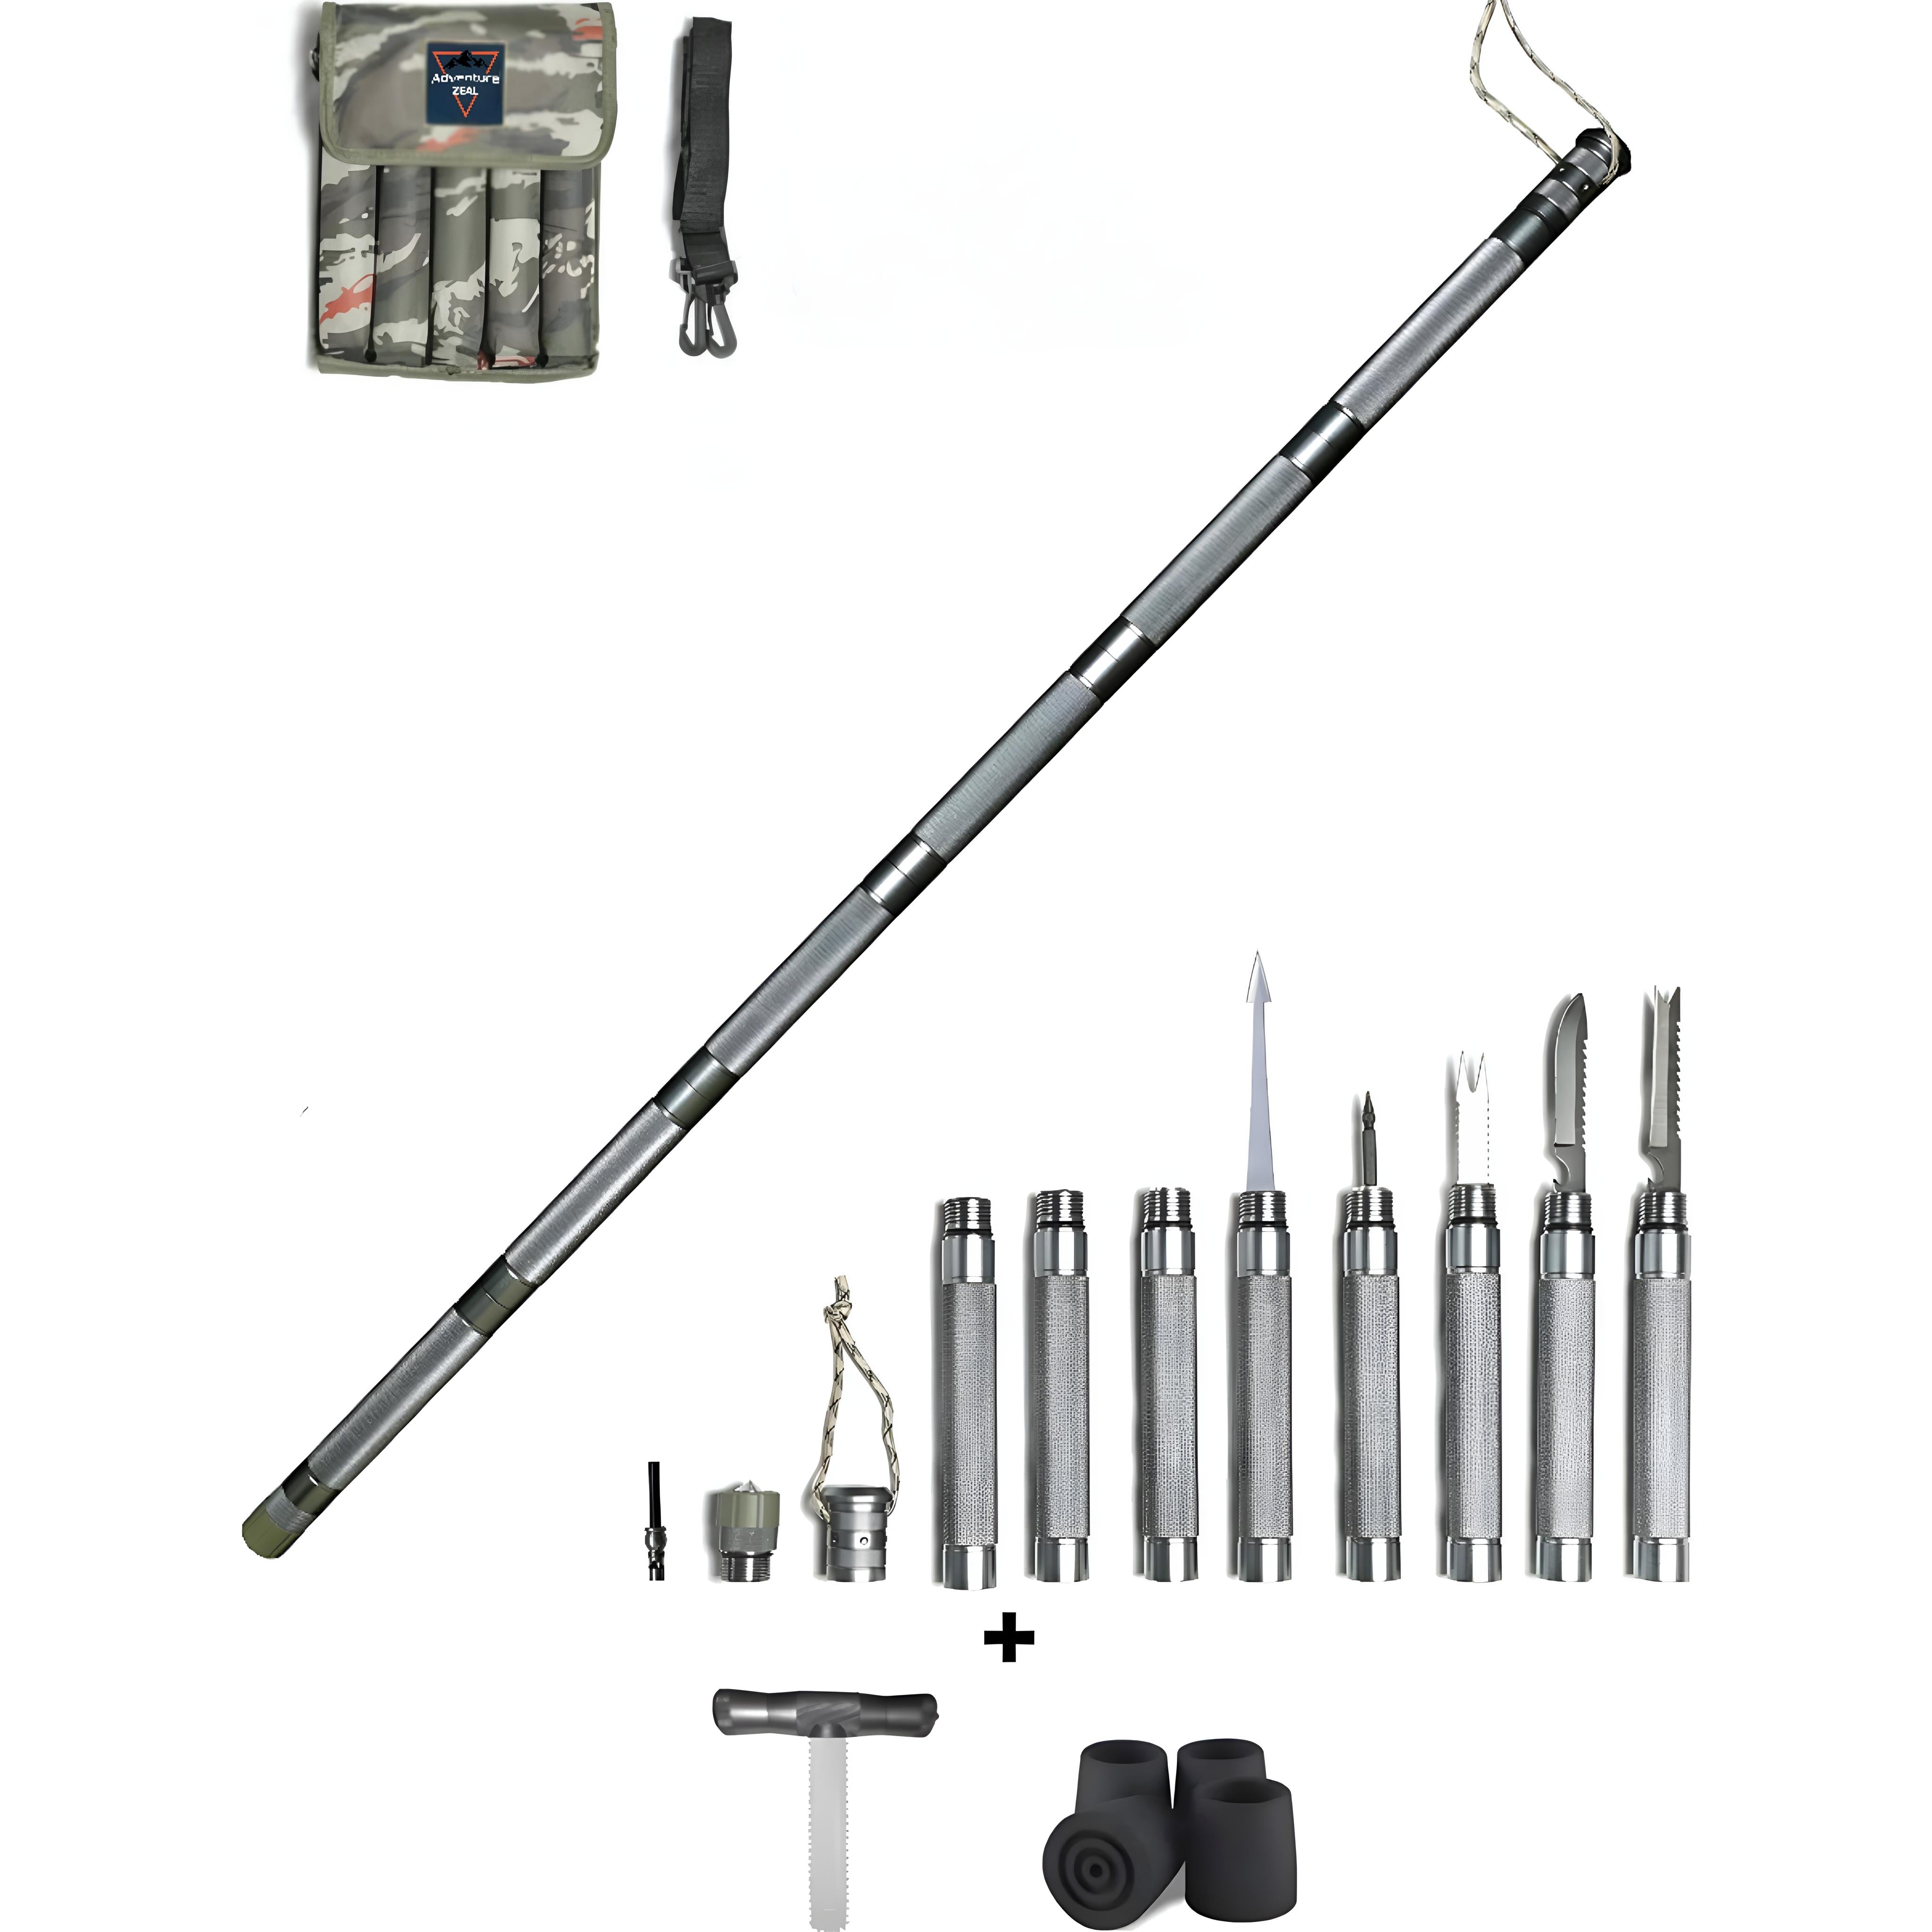 Adventure Zeal Outdoor Tactical Walking Stick Bundle with T-Handle and Rubber Tips